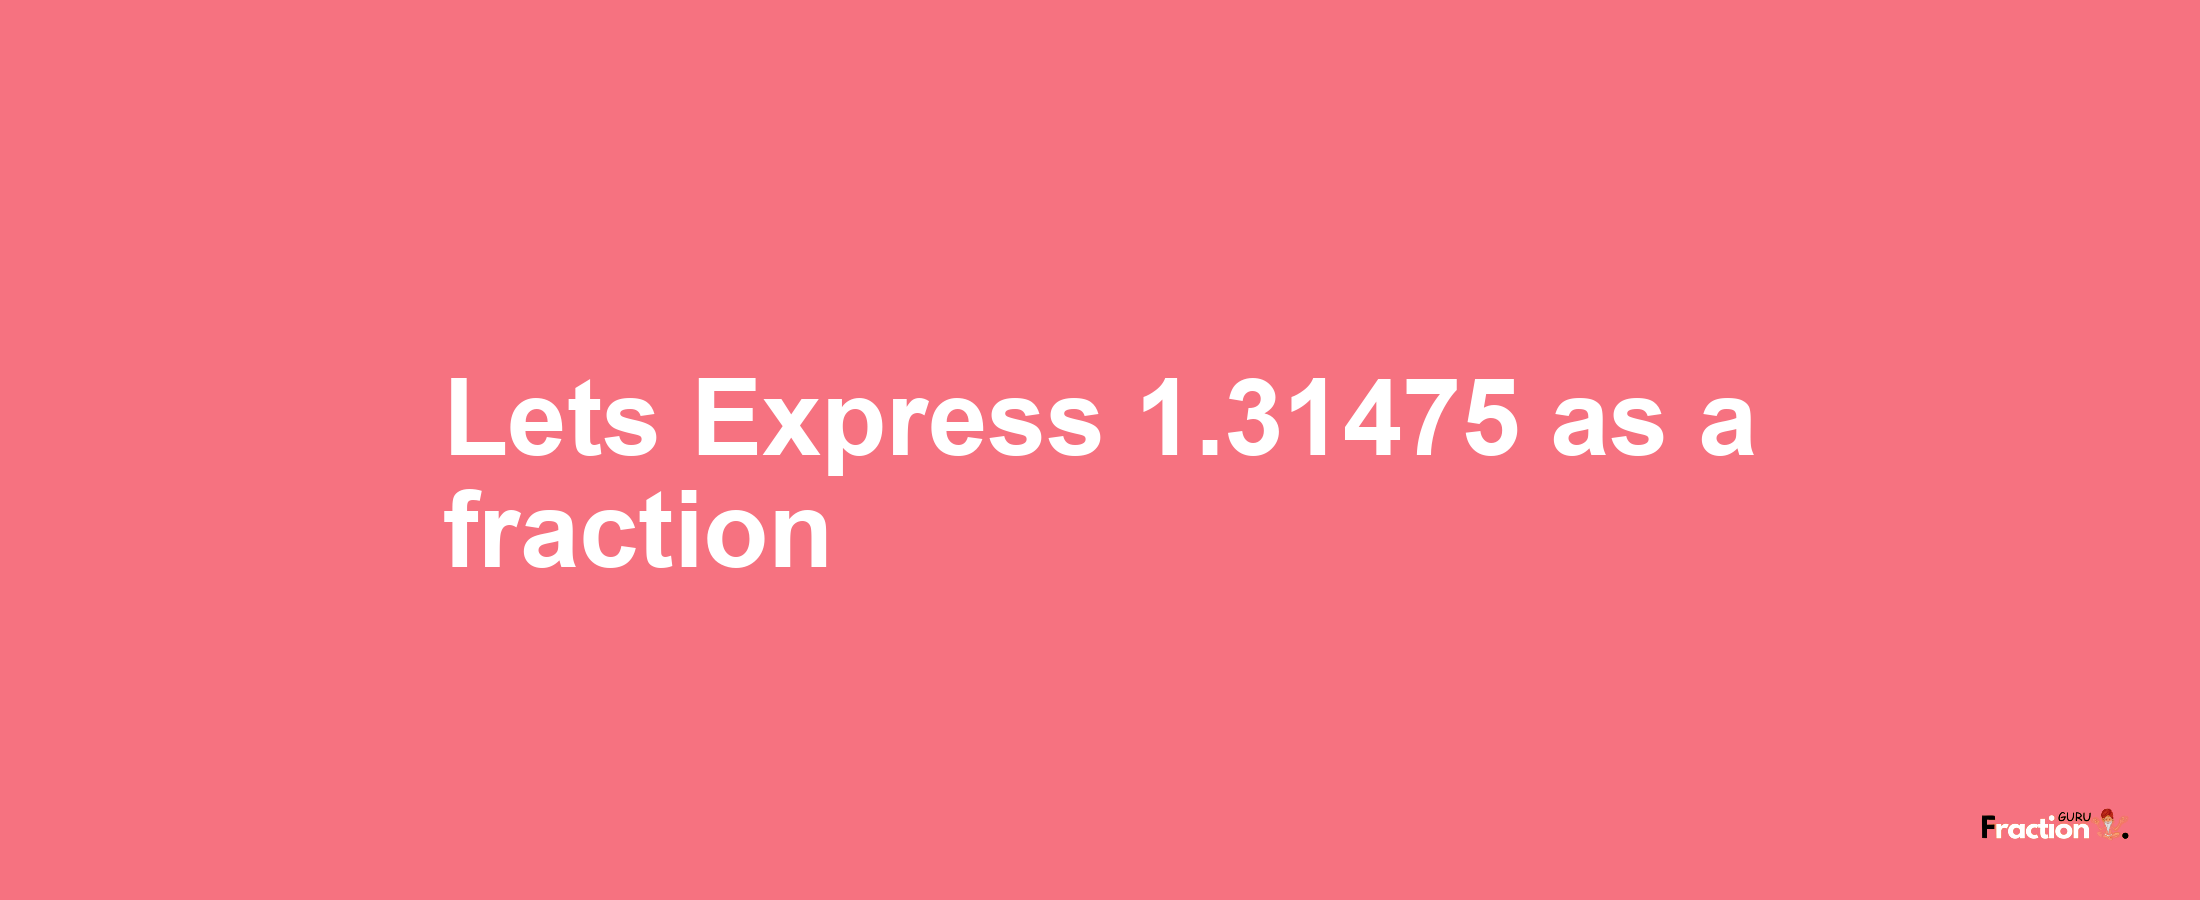 Lets Express 1.31475 as afraction